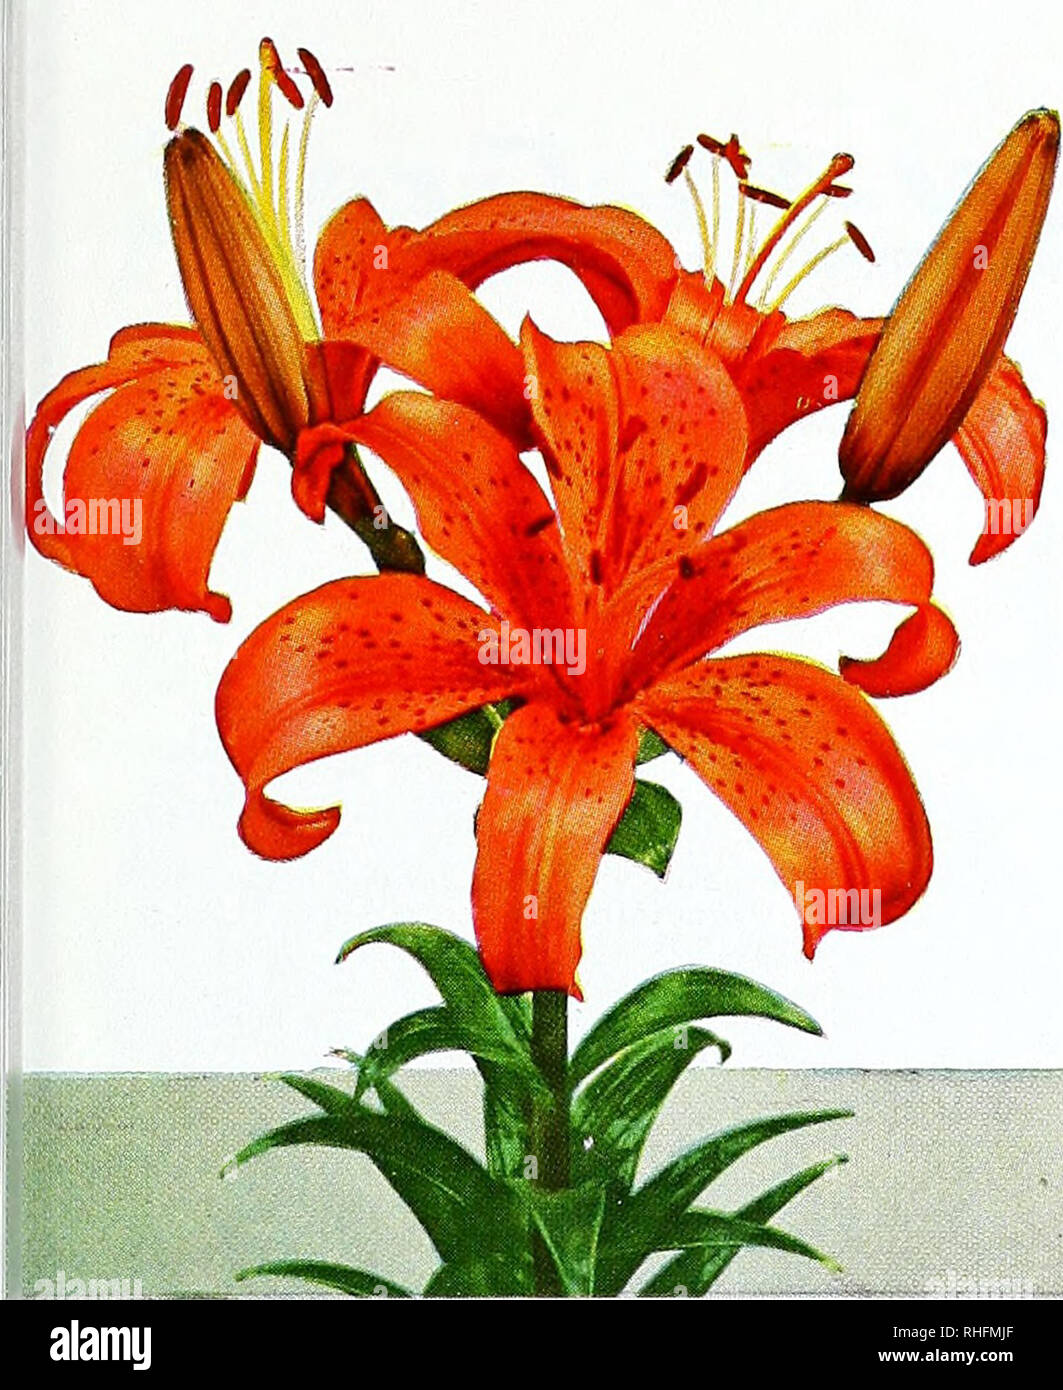 . Bolgiano's bulbs, plants and lawn seeds for fall 1964 planting. Nurseries (Horticulture) Catalogs; Bulbs (Plants) Catalogs; Seeds Catalogs; Trees Catalogs. ENCHANTMENT Madonna {Lilium candidum). Wliite. June bloom- ing. French grown. 65c. each; 3 for $1.85; $7.00 do Speciosum Rubrum. White, tinted pink and heavily spotted red. $1.00 each; 3 for $2.50; S9.00 per doz. Croft. Write for prices. y'^'^y^-^'^0-'ixotk. Colorful - Easy to Grow These glorious Lilies were grown for you in Oregon on the slopes of lovefy Mount Hood. Ready for delivery in October. Each 3 Auratum Platyphyllum. The Gold-Ba Stock Photo